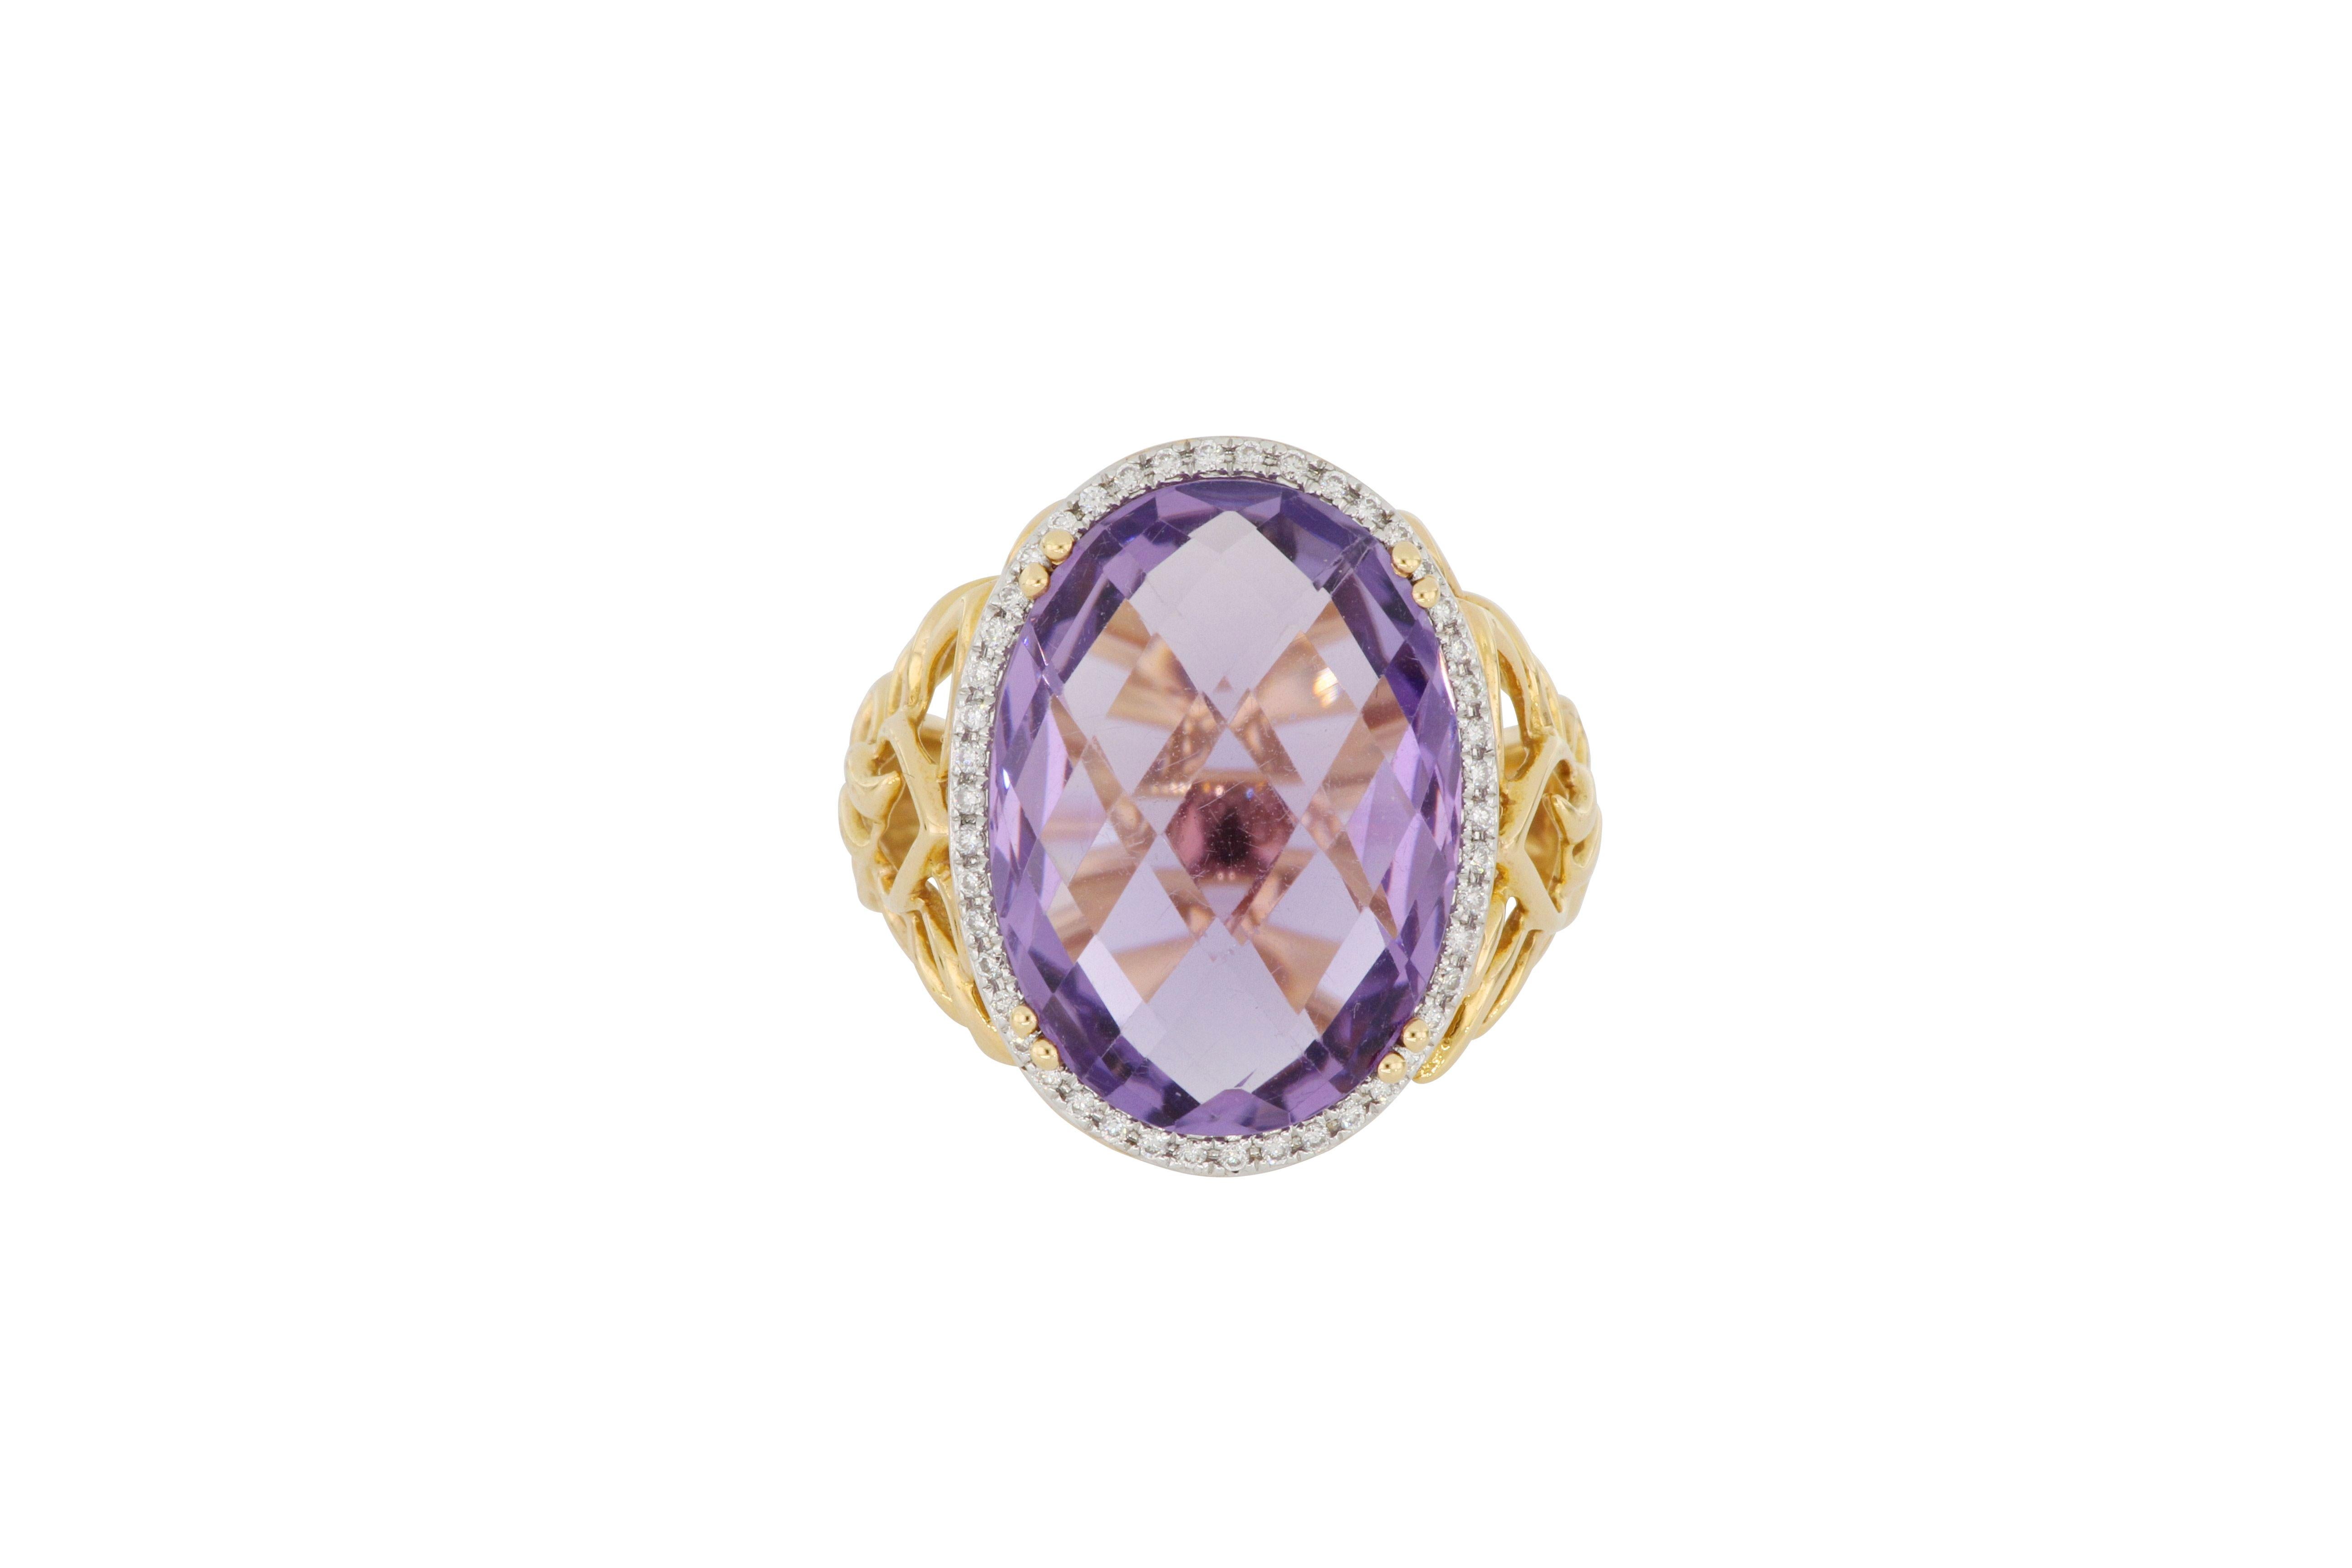 A natural amethyst and brilliant-cut diamond ring, centering a 11.12 carats oval-shaped amethyst, framed by brilliant cut diamonds totalling  0.14 carats diamonds, mounted in 18 karat rose gold. It is a fabulous piece of jewellery with beautiful